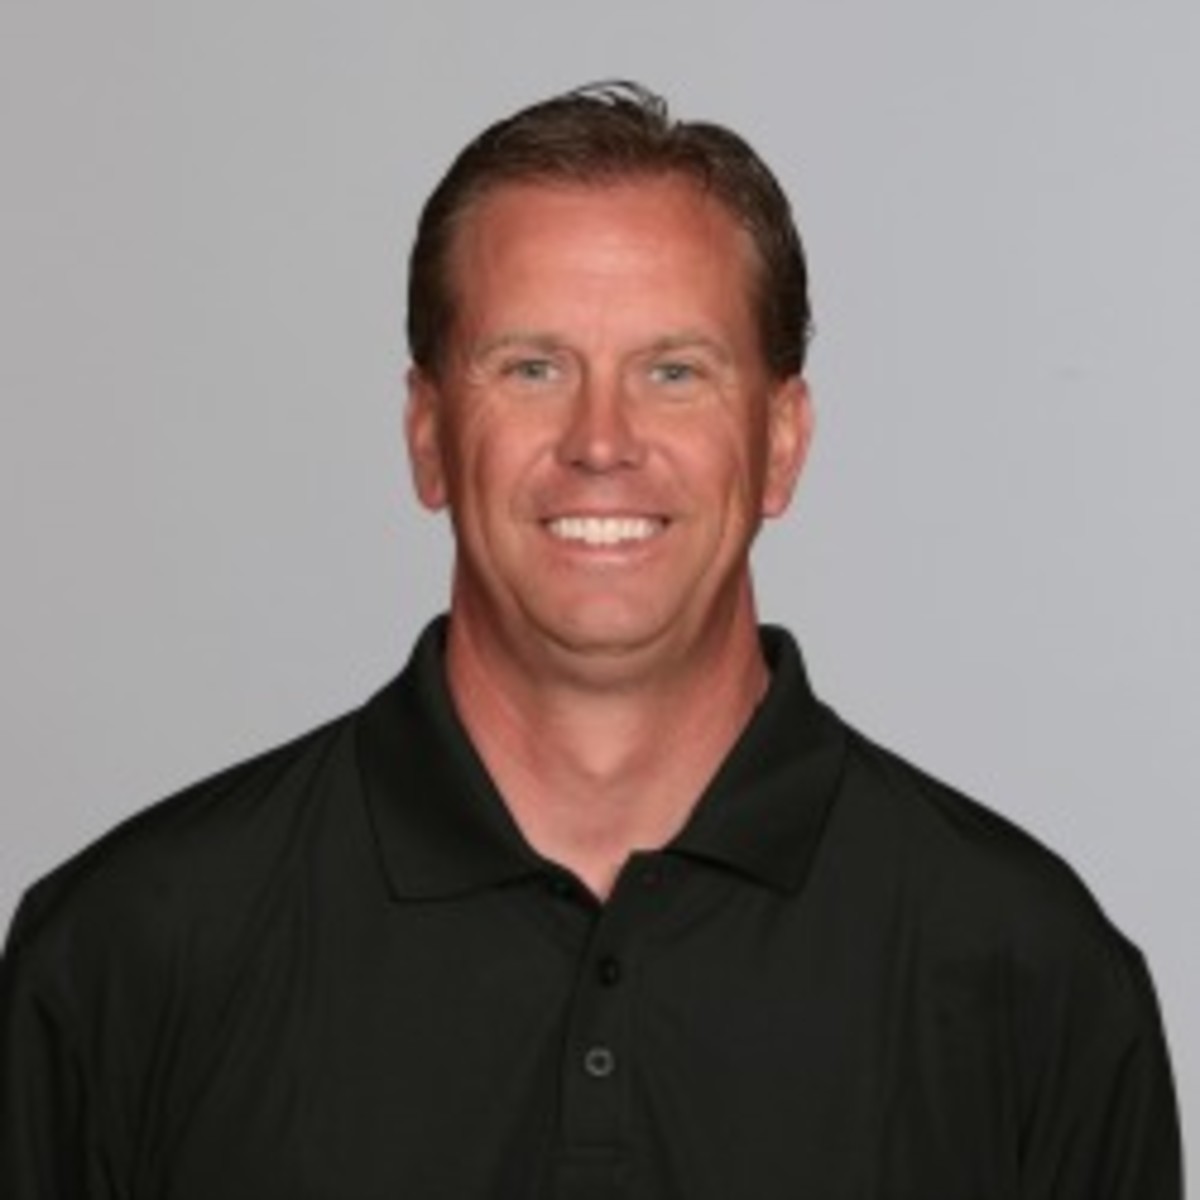 Oklahoma State's Todd Monken will be Southern Mississippi's next head coach. (Getty Images)